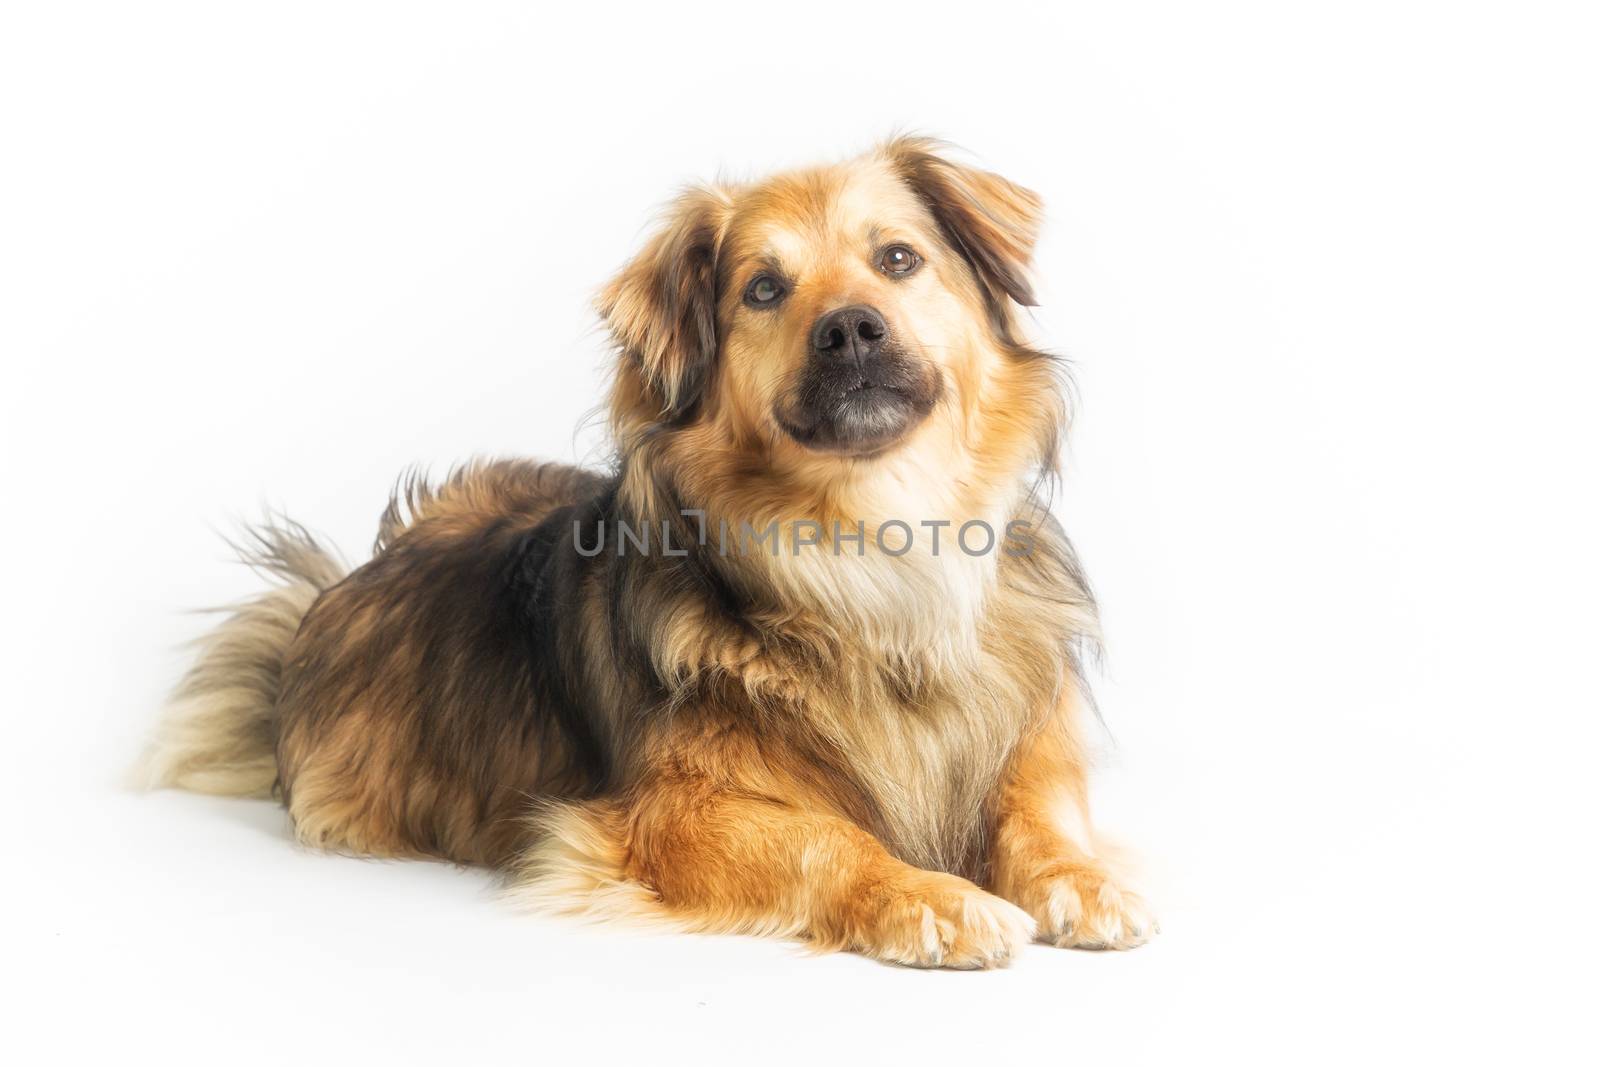 Lying dog in studio with white background